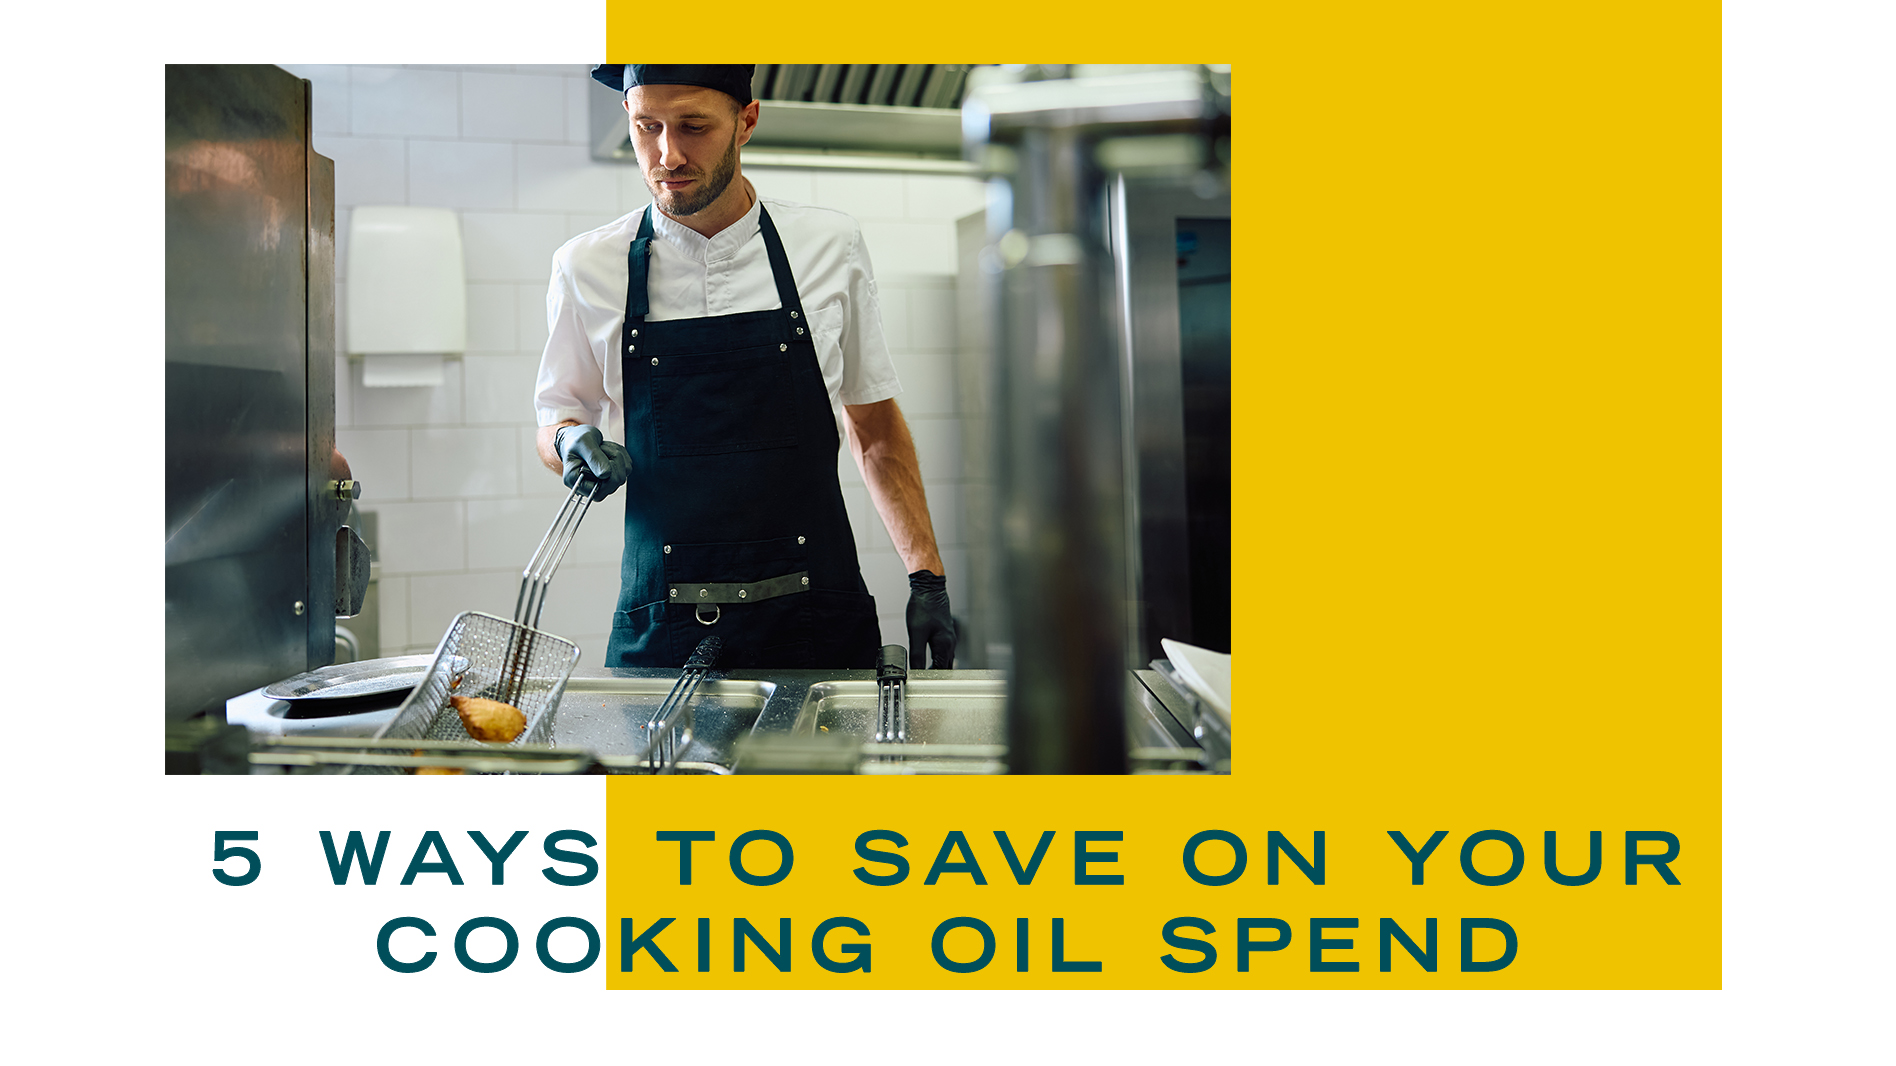 5 ways to save on your cooking oil spend